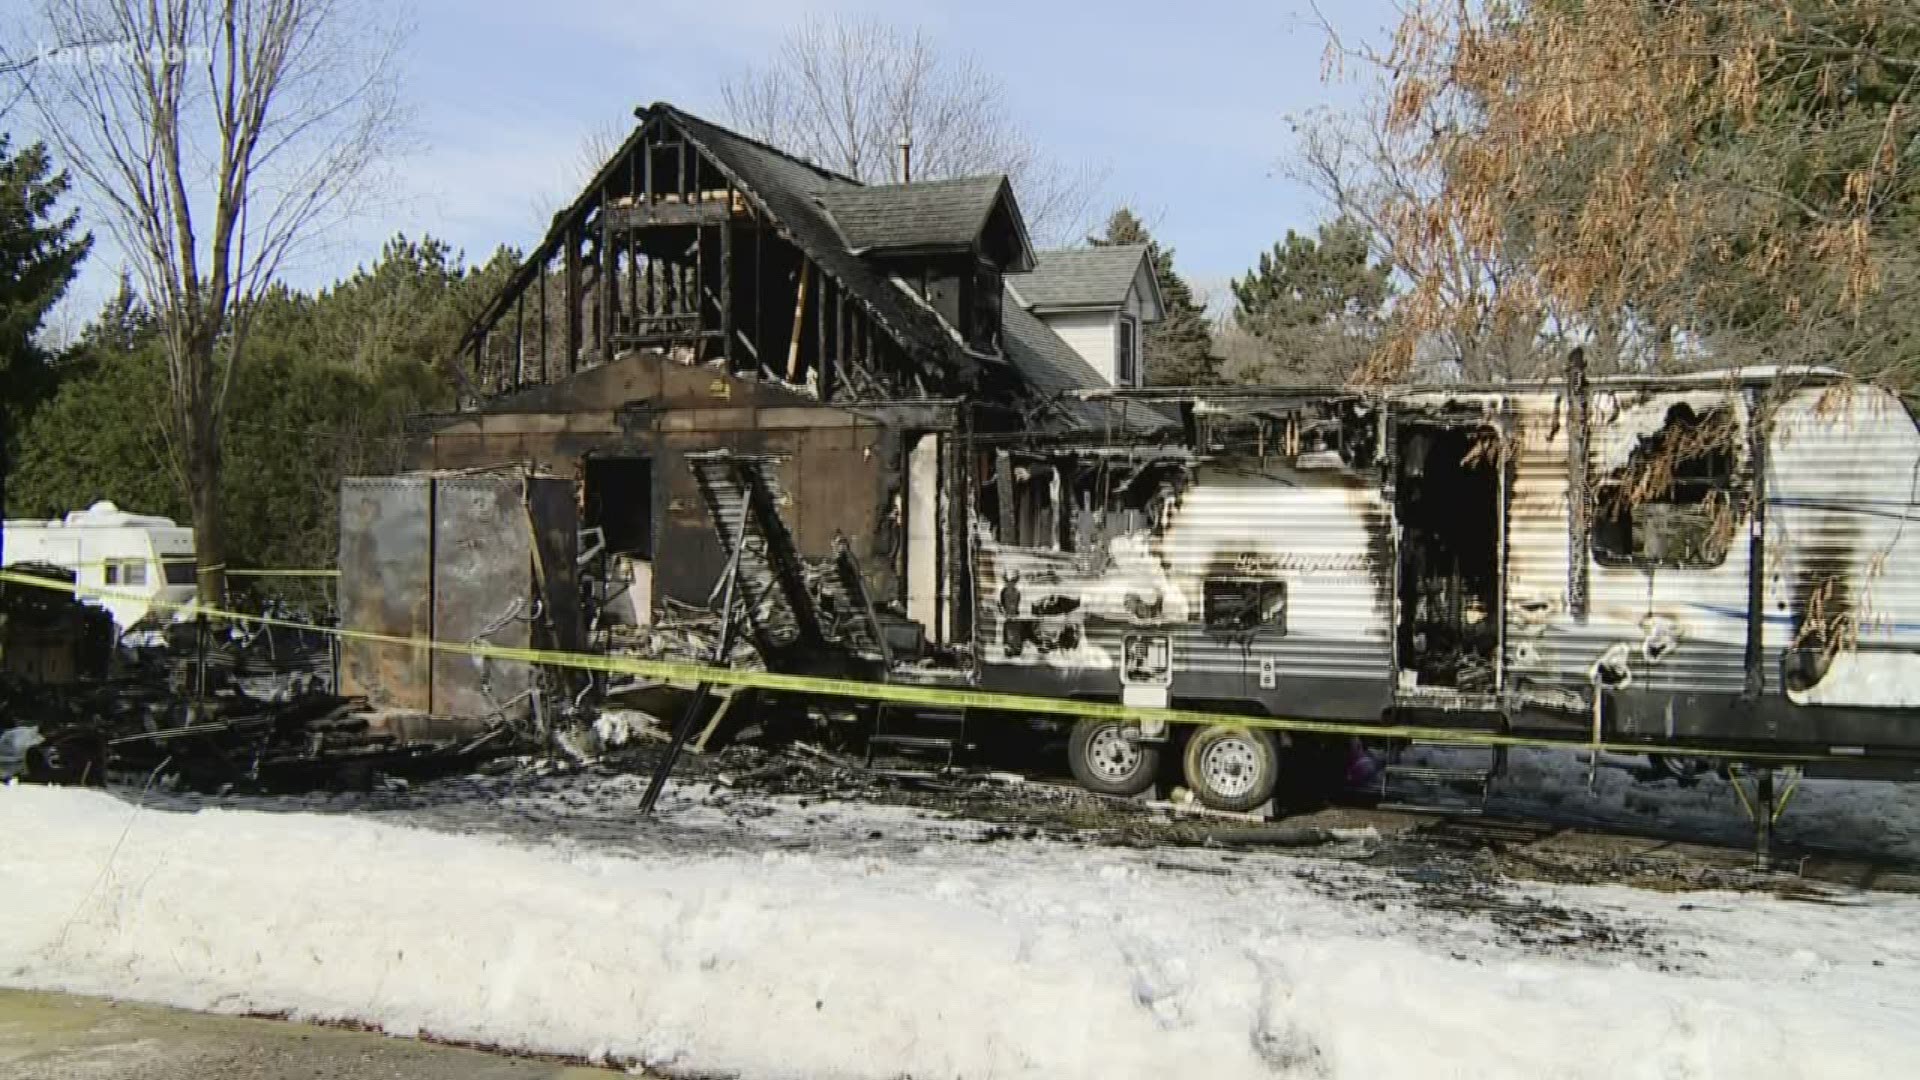 A man is dead following an early morning house fire in Andover Tuesday.